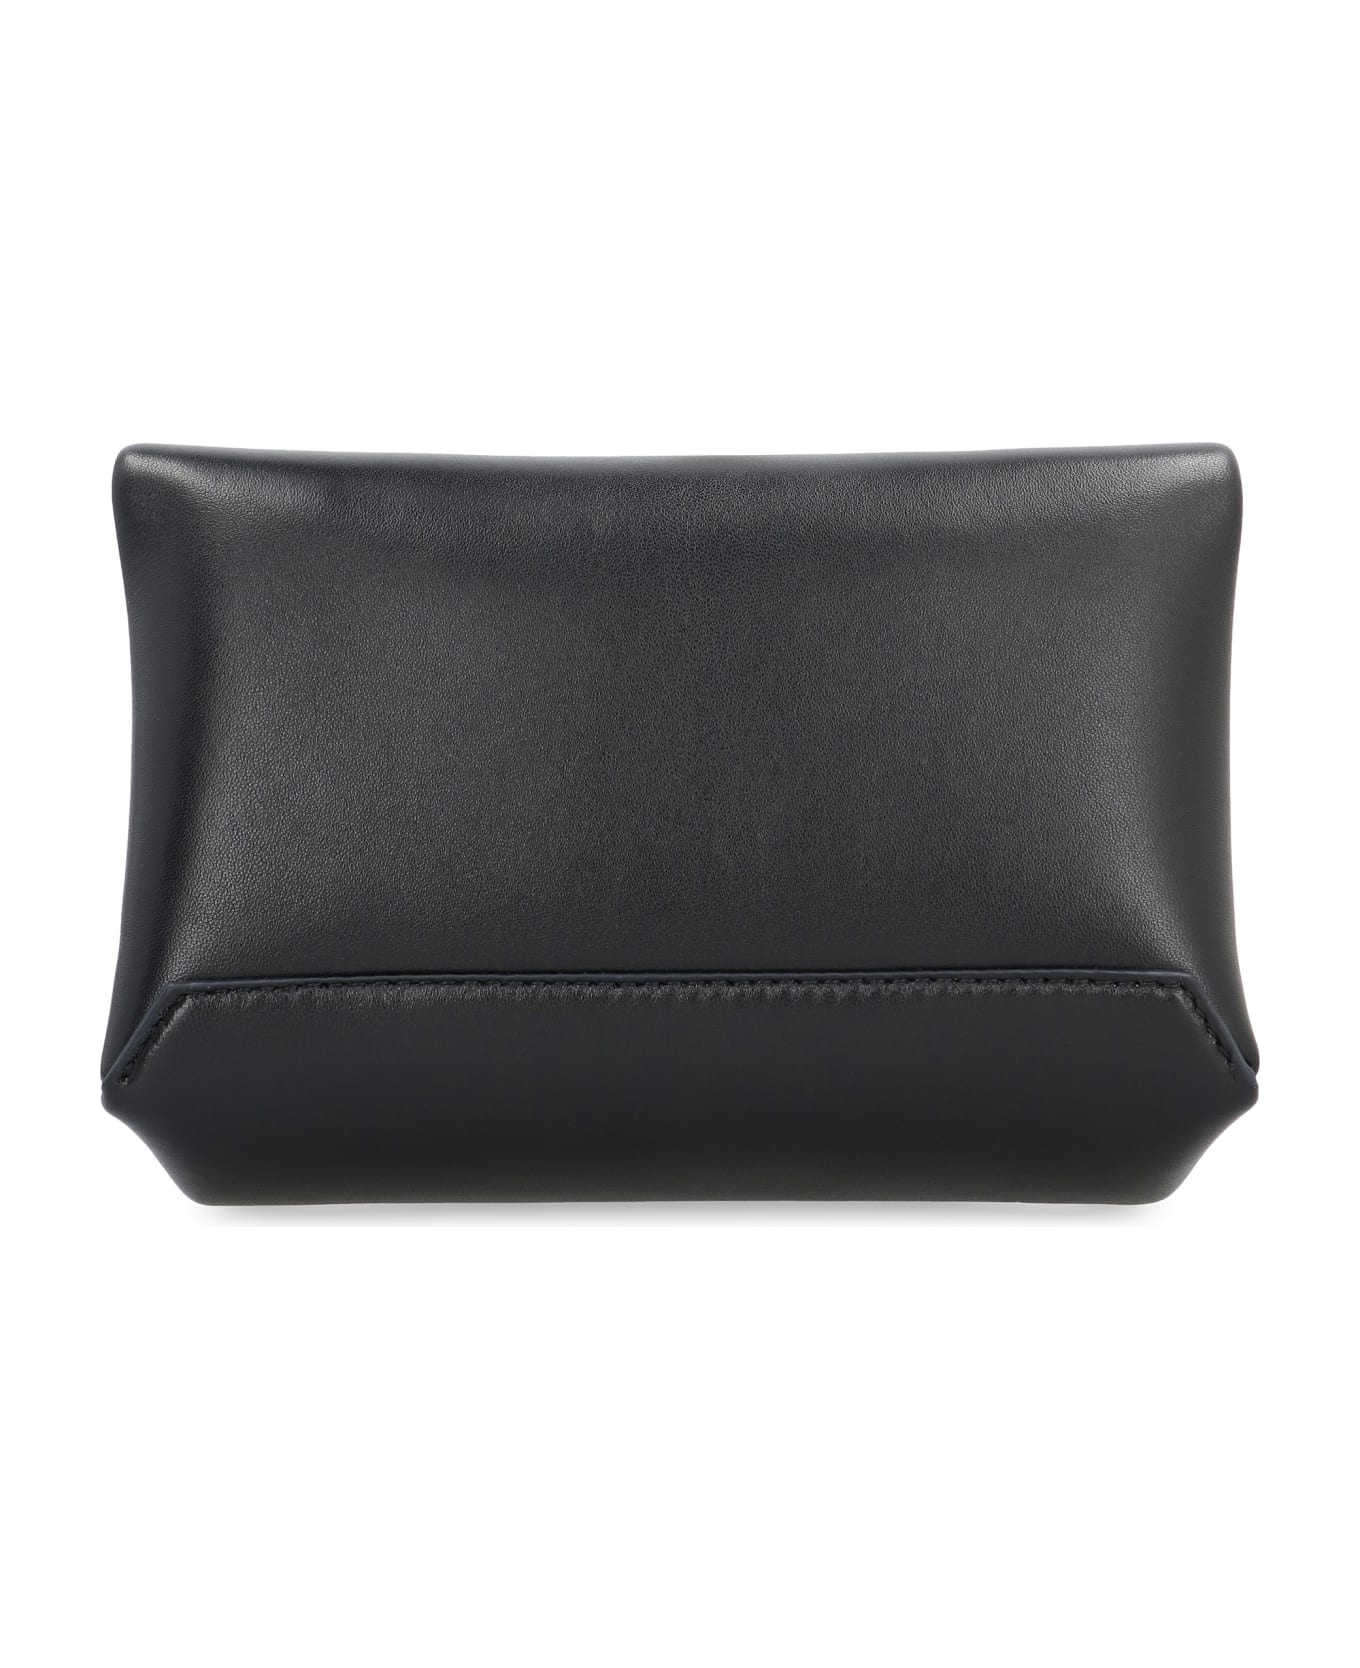 Victoria Beckham Leather Mini Pouch - BLACK クラッチバッグ